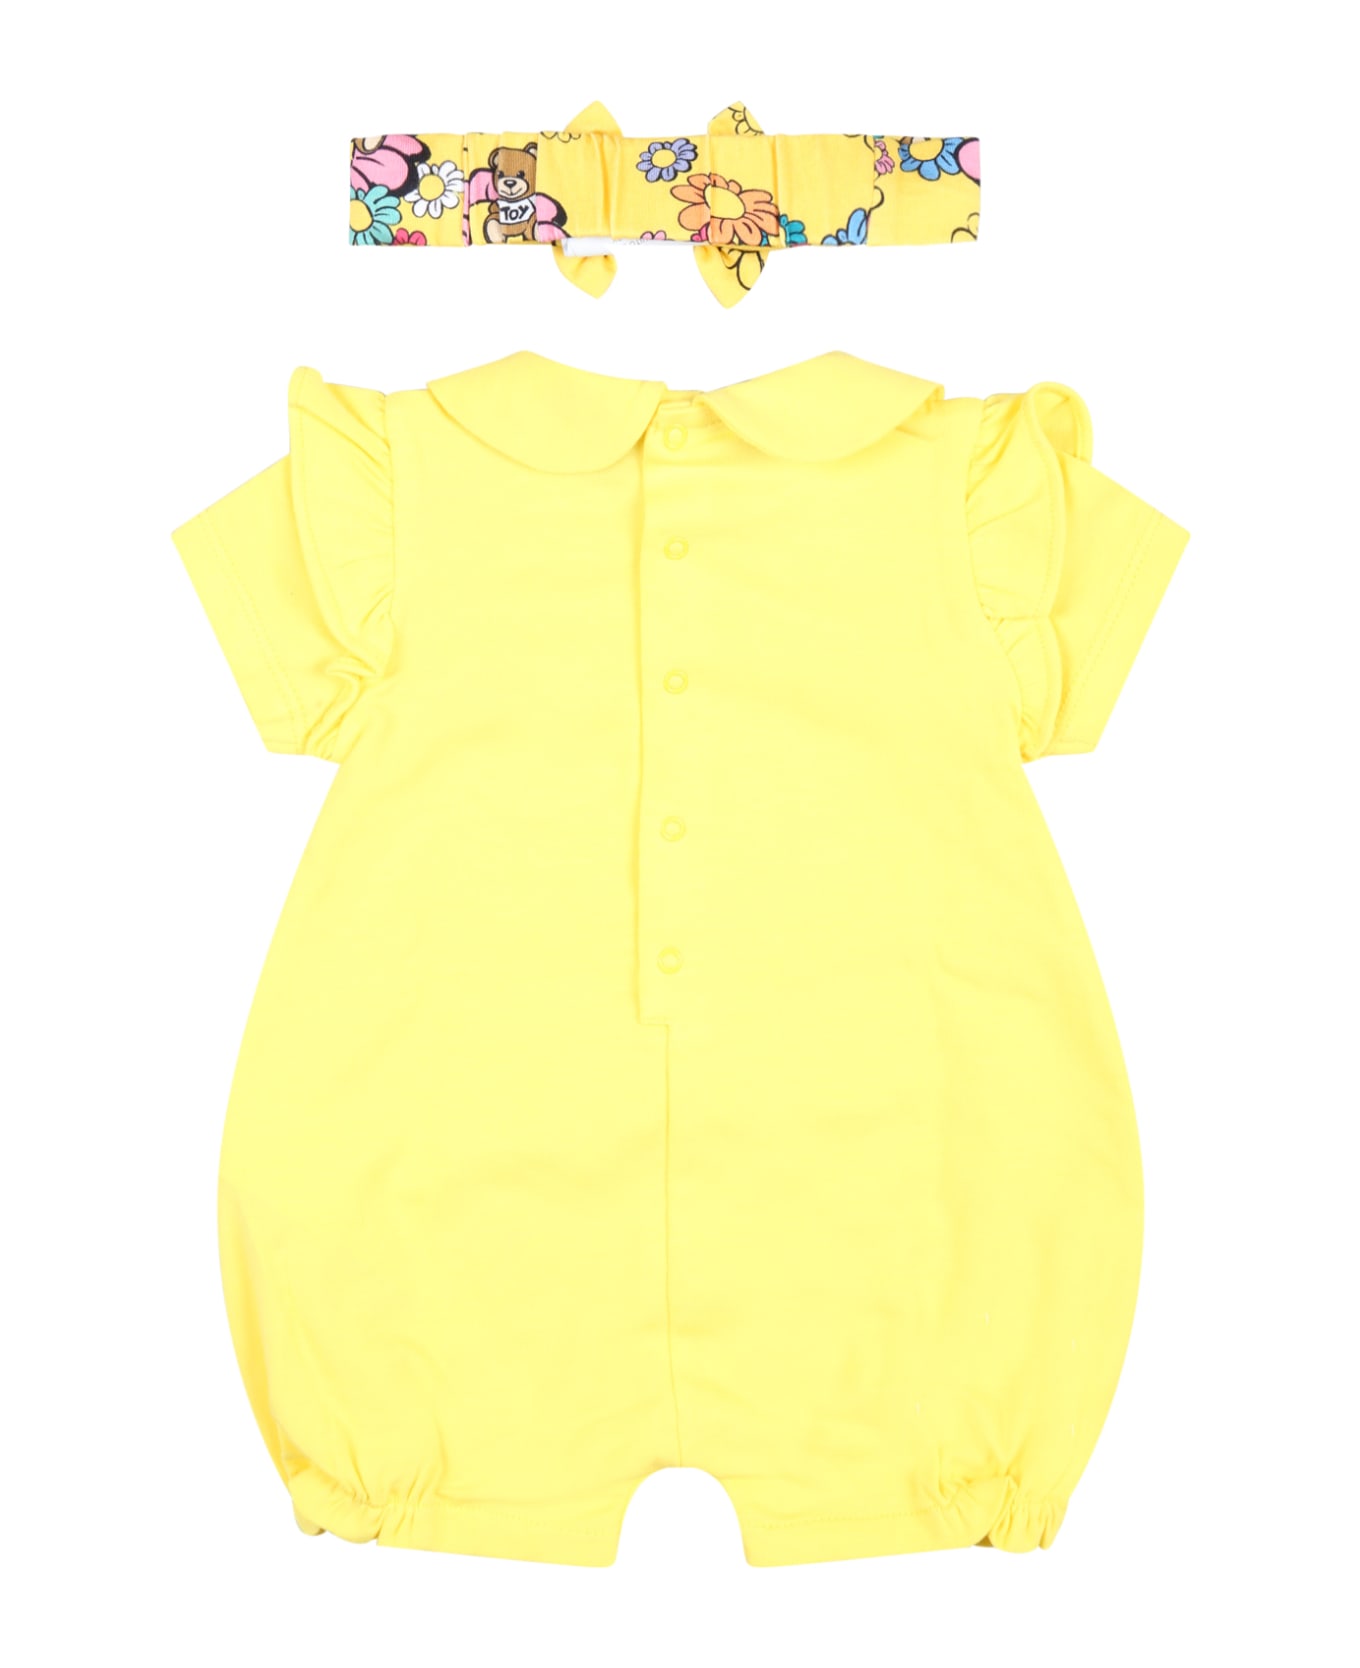 Moschino Yellow Set For Baby Girl With Teddy Bear And Flowers - Yellow